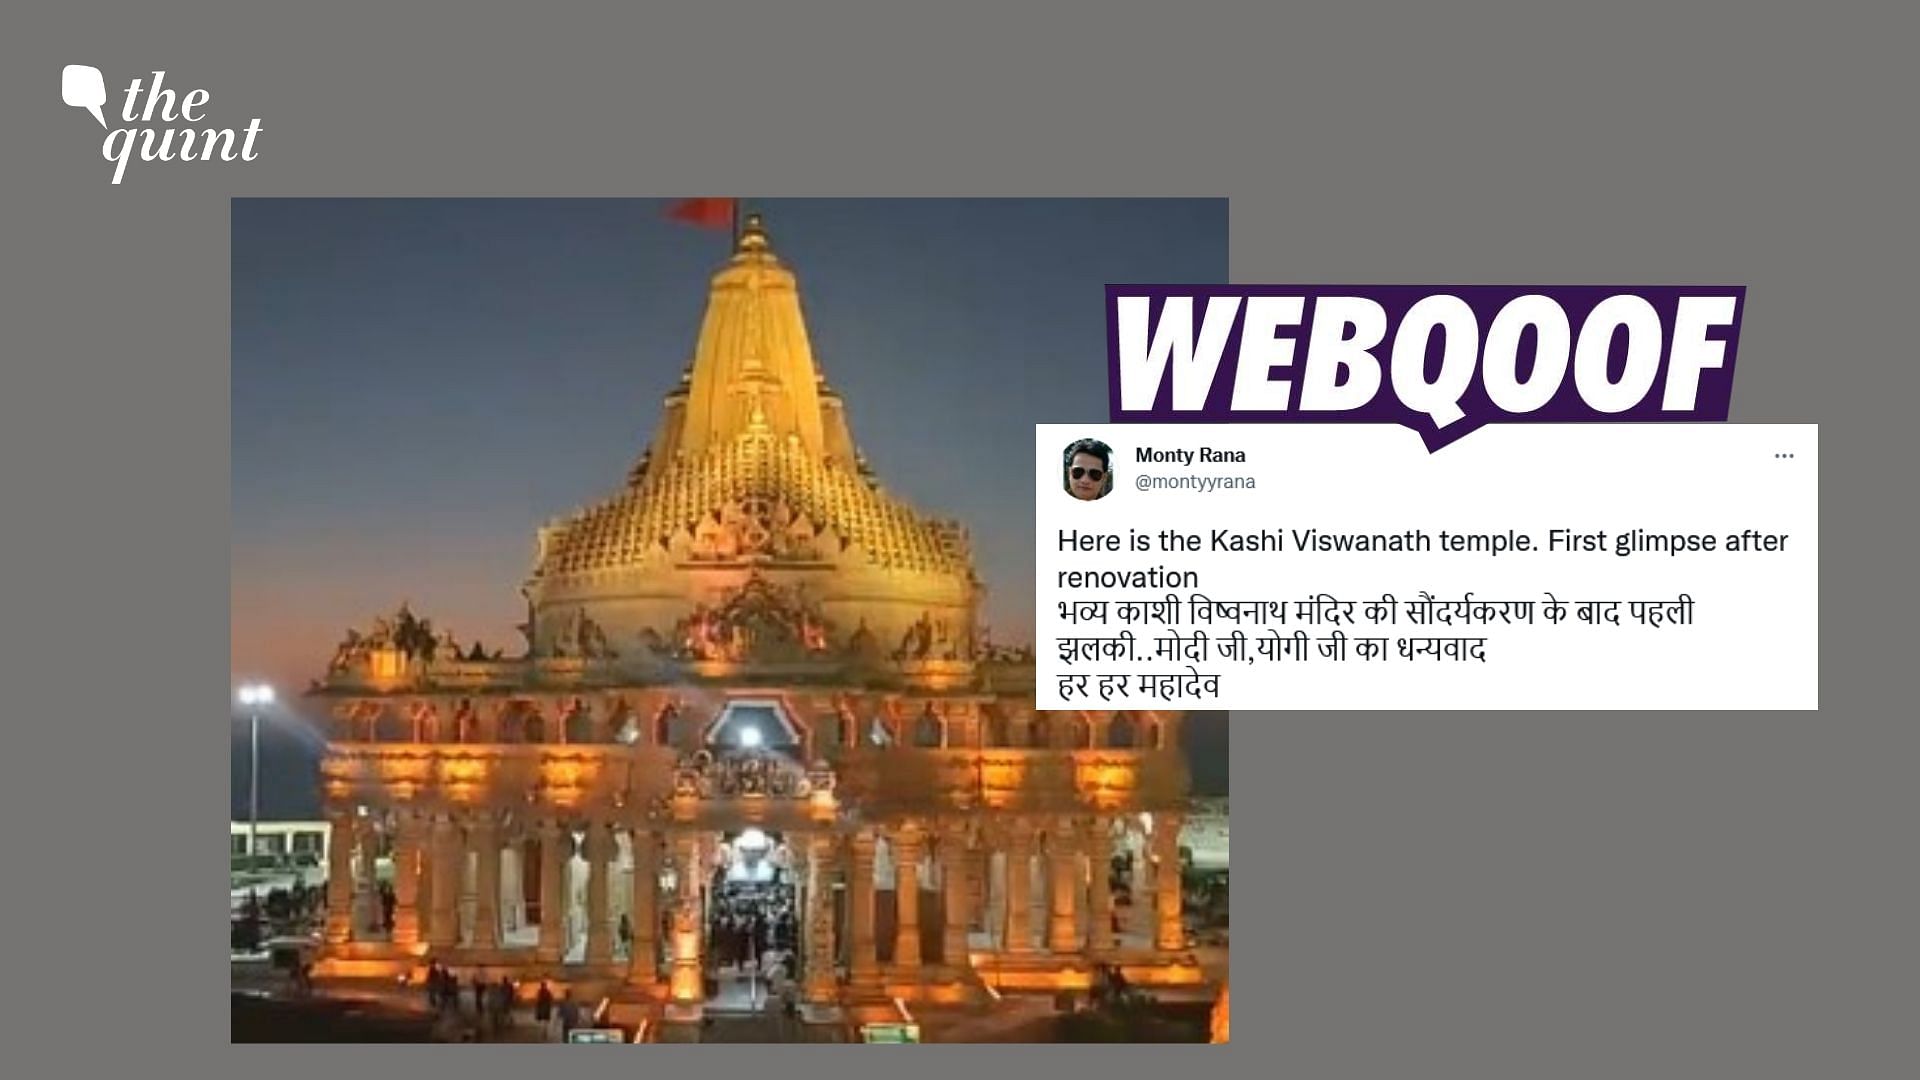 <div class="paragraphs"><p>Video of Somnath Temple in Gujarat was used to falsely claim that it showed the Kashi Vishwanath Temple in Uttar Pradesh after renovation.</p></div>